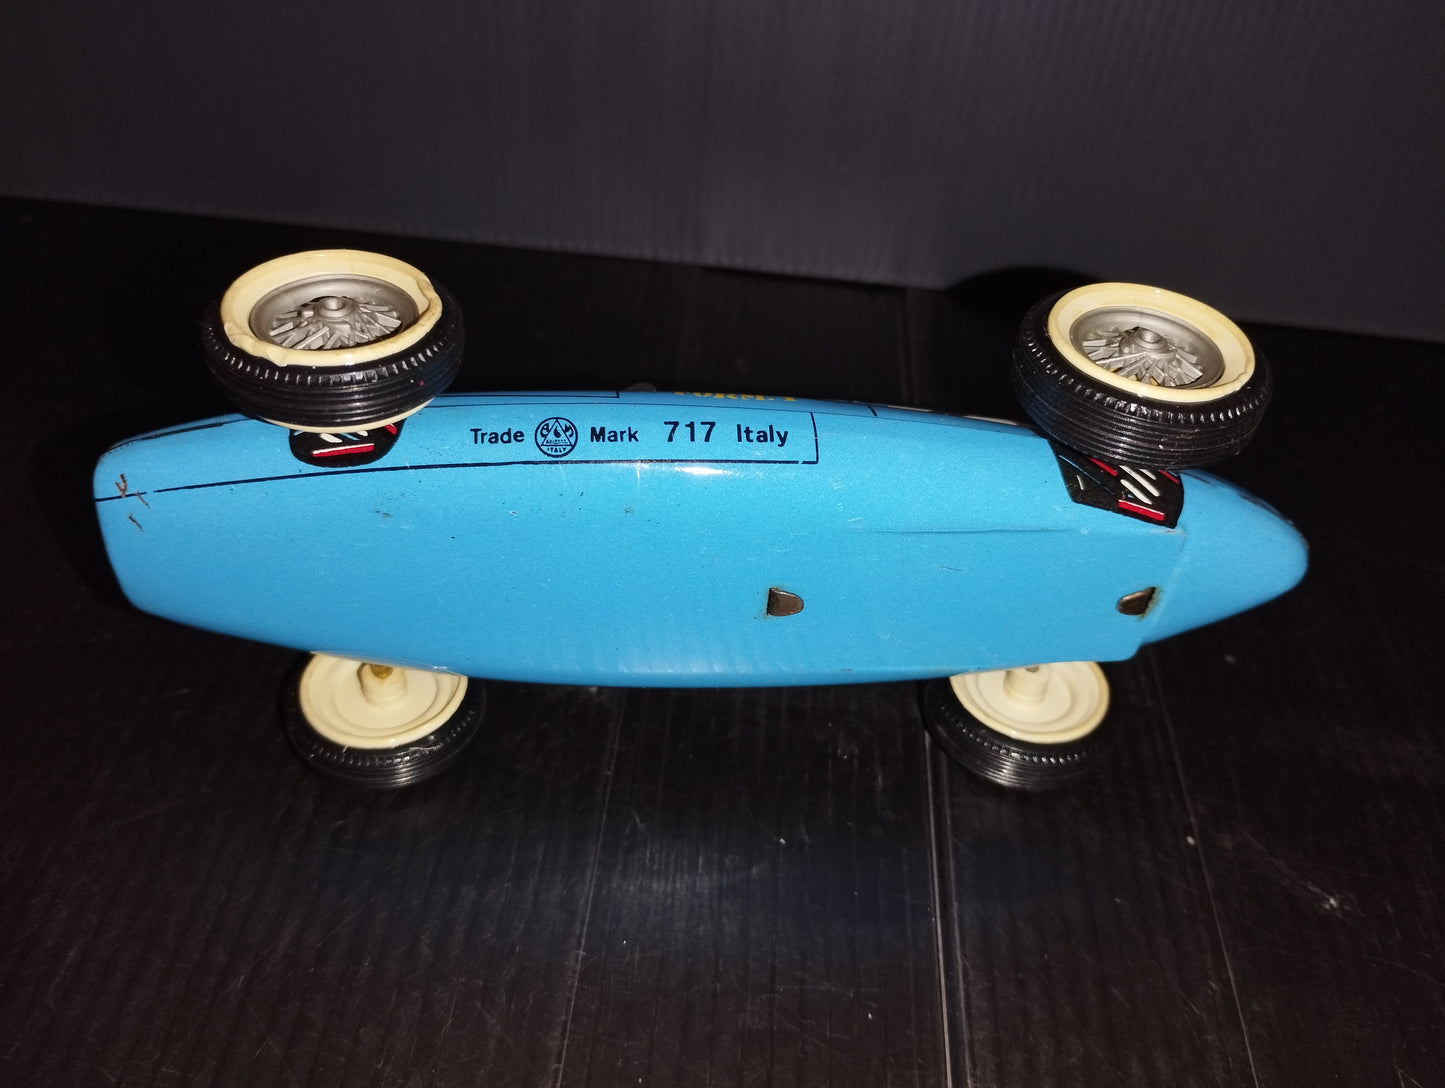 Grand Prix Form 1 model

 Produced by Marchesini

 In tin with plastic parts